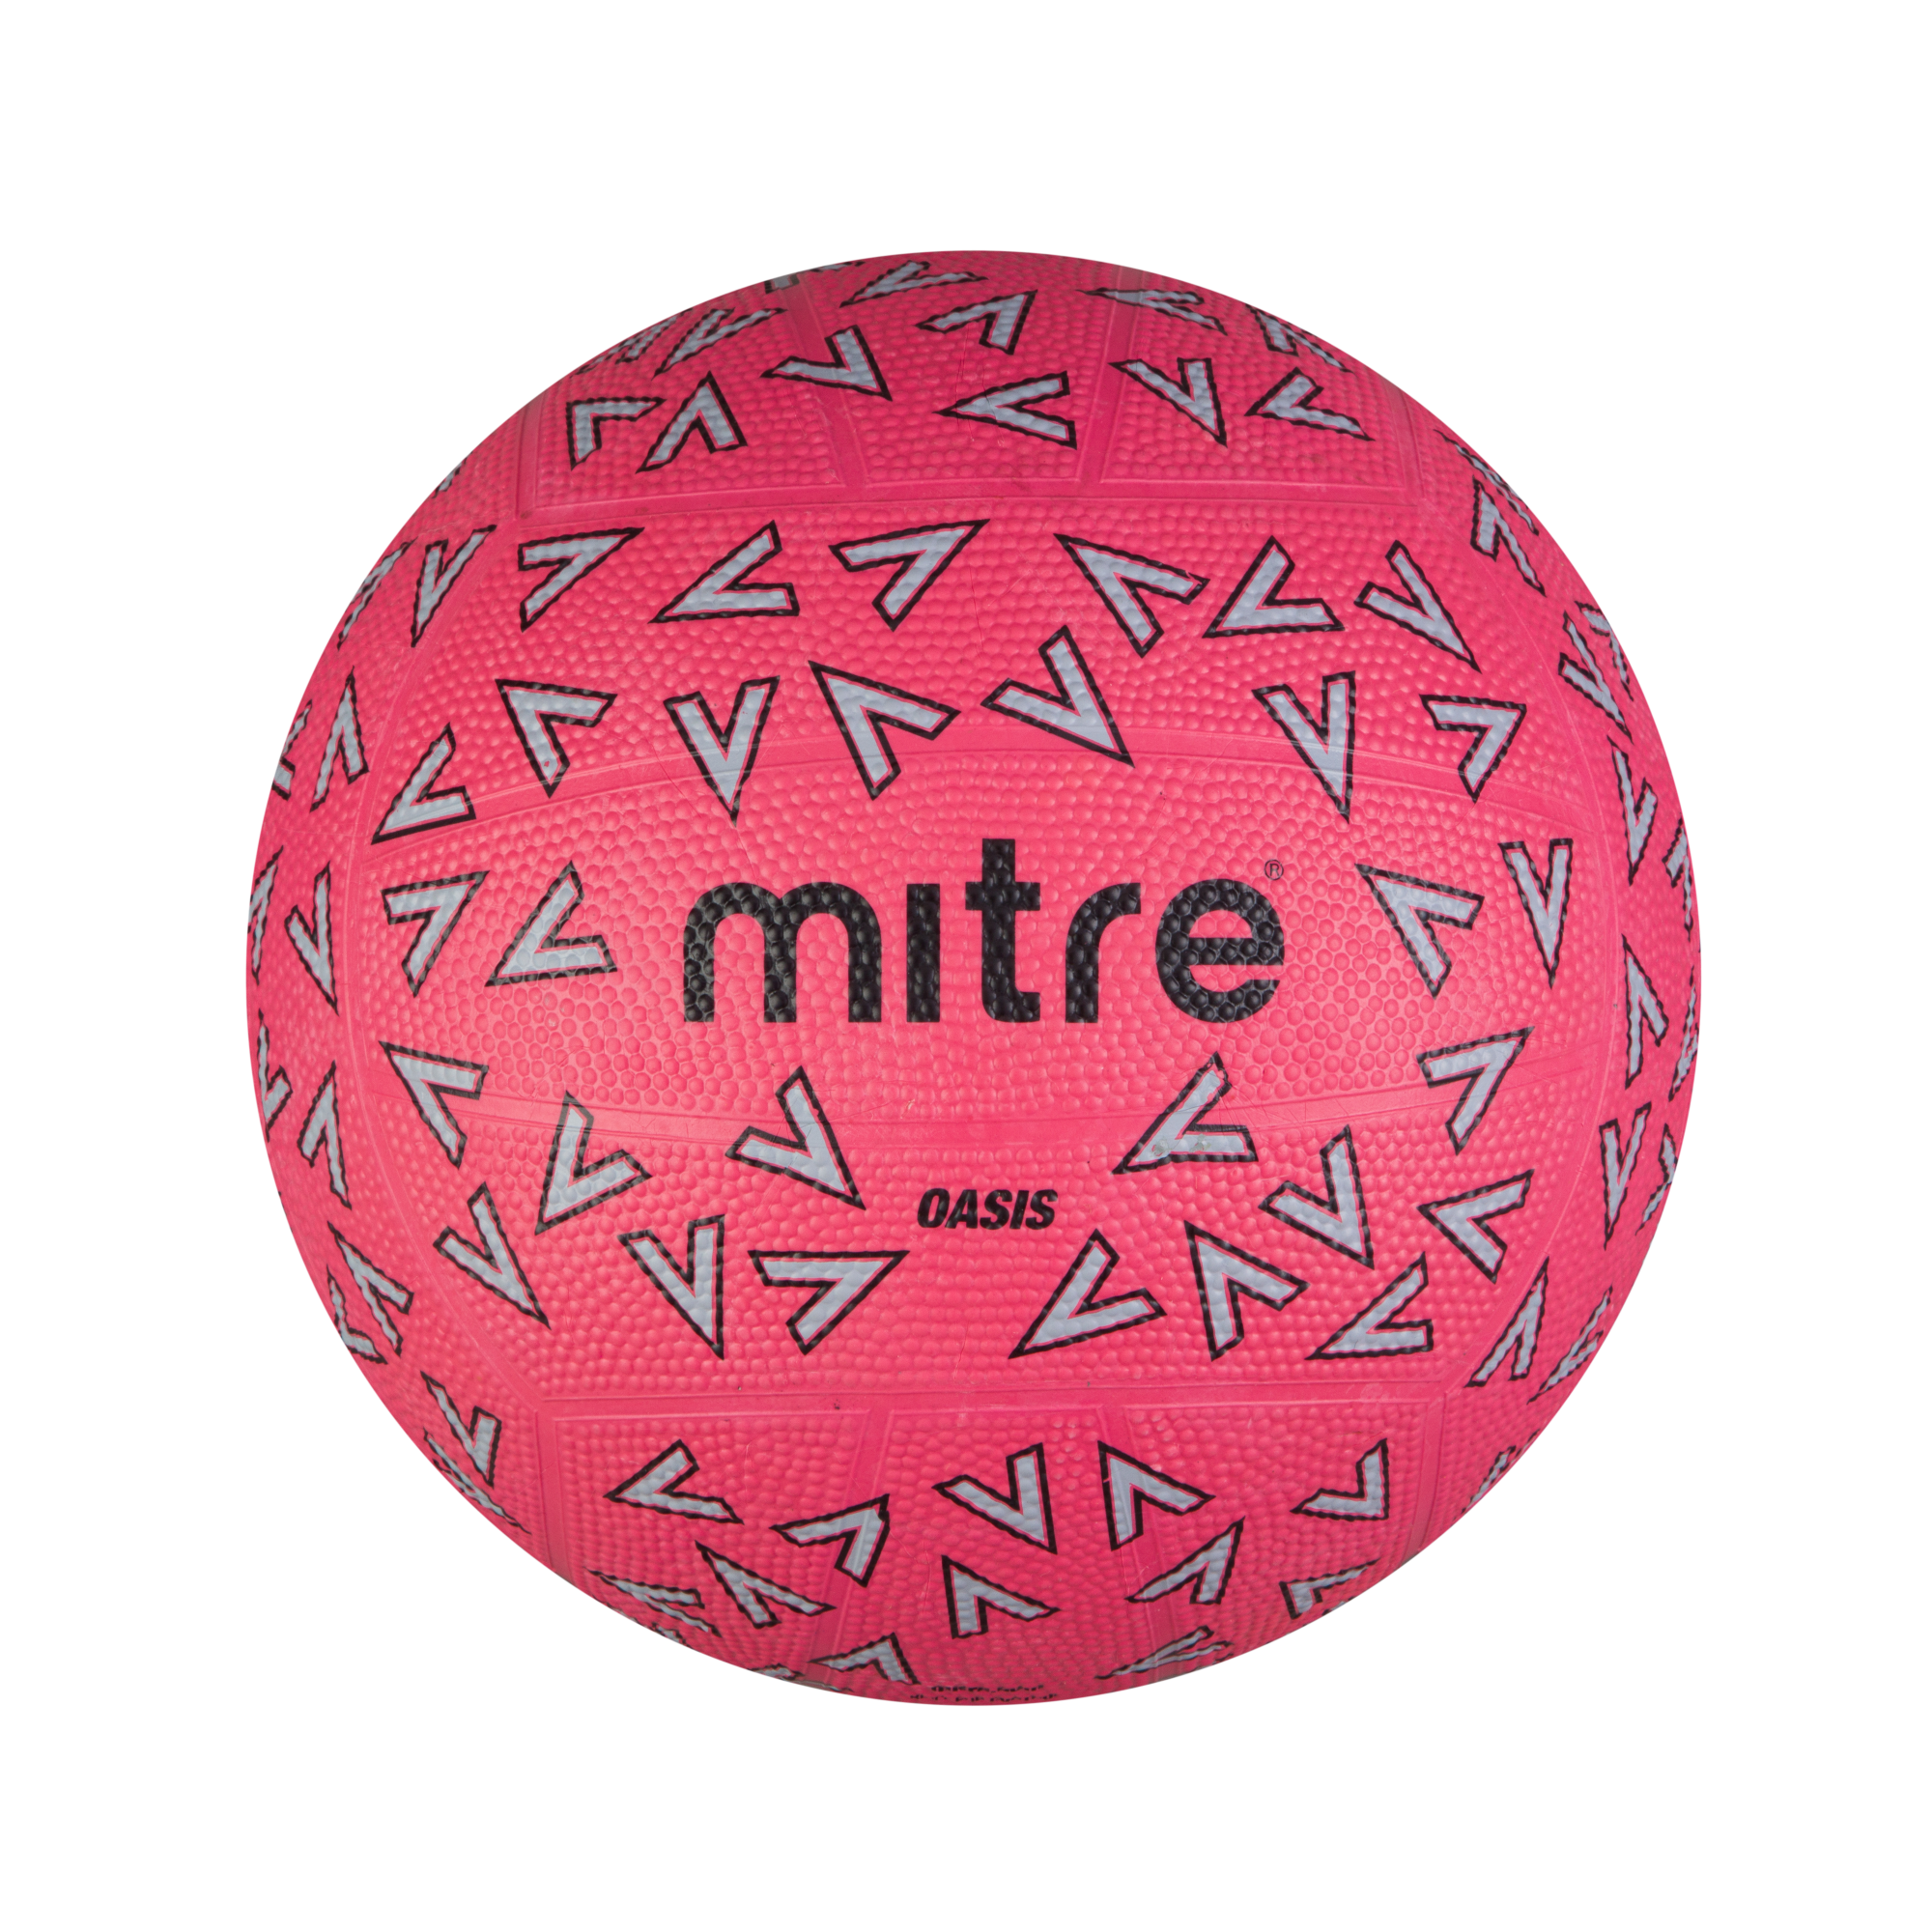 Mitre Oasis Netball Size4 Pink